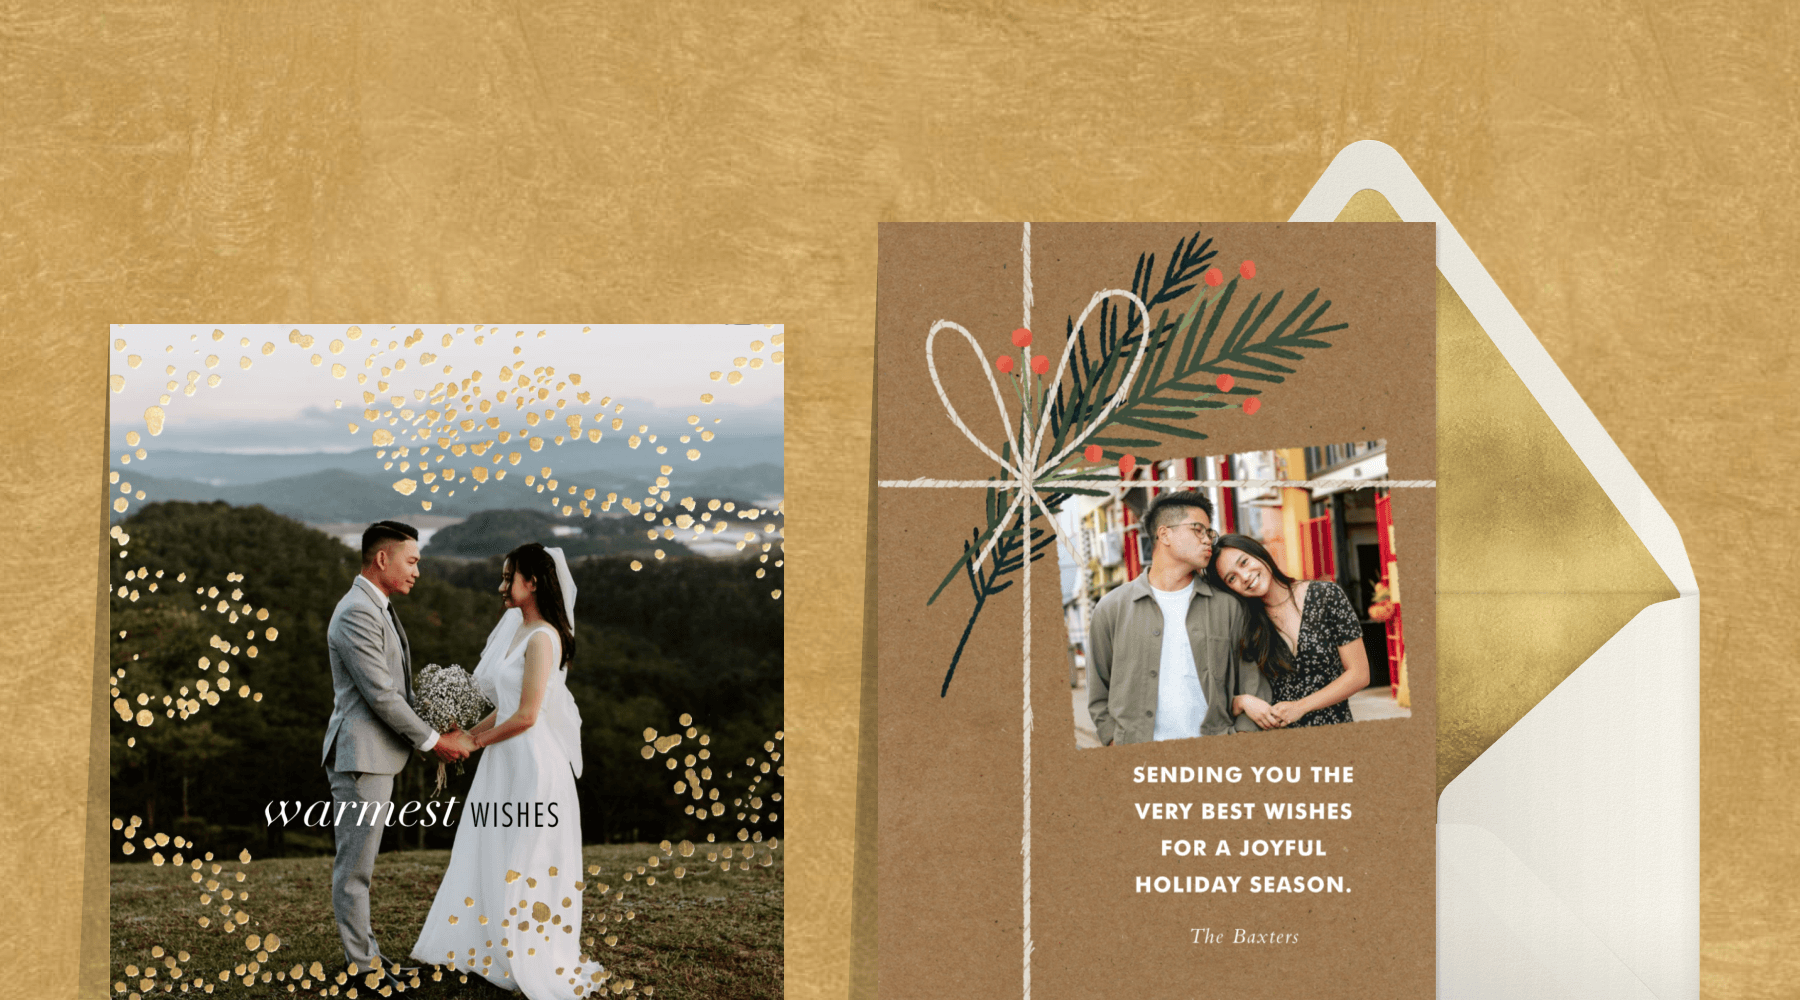 Two holiday photo cards. Left: A full bleed image of a bride and groom on a mountain with gold dots swirling around; Right: A card that looks like a craft-paper wrapped present with a sprig of evergreen with space for a photo.